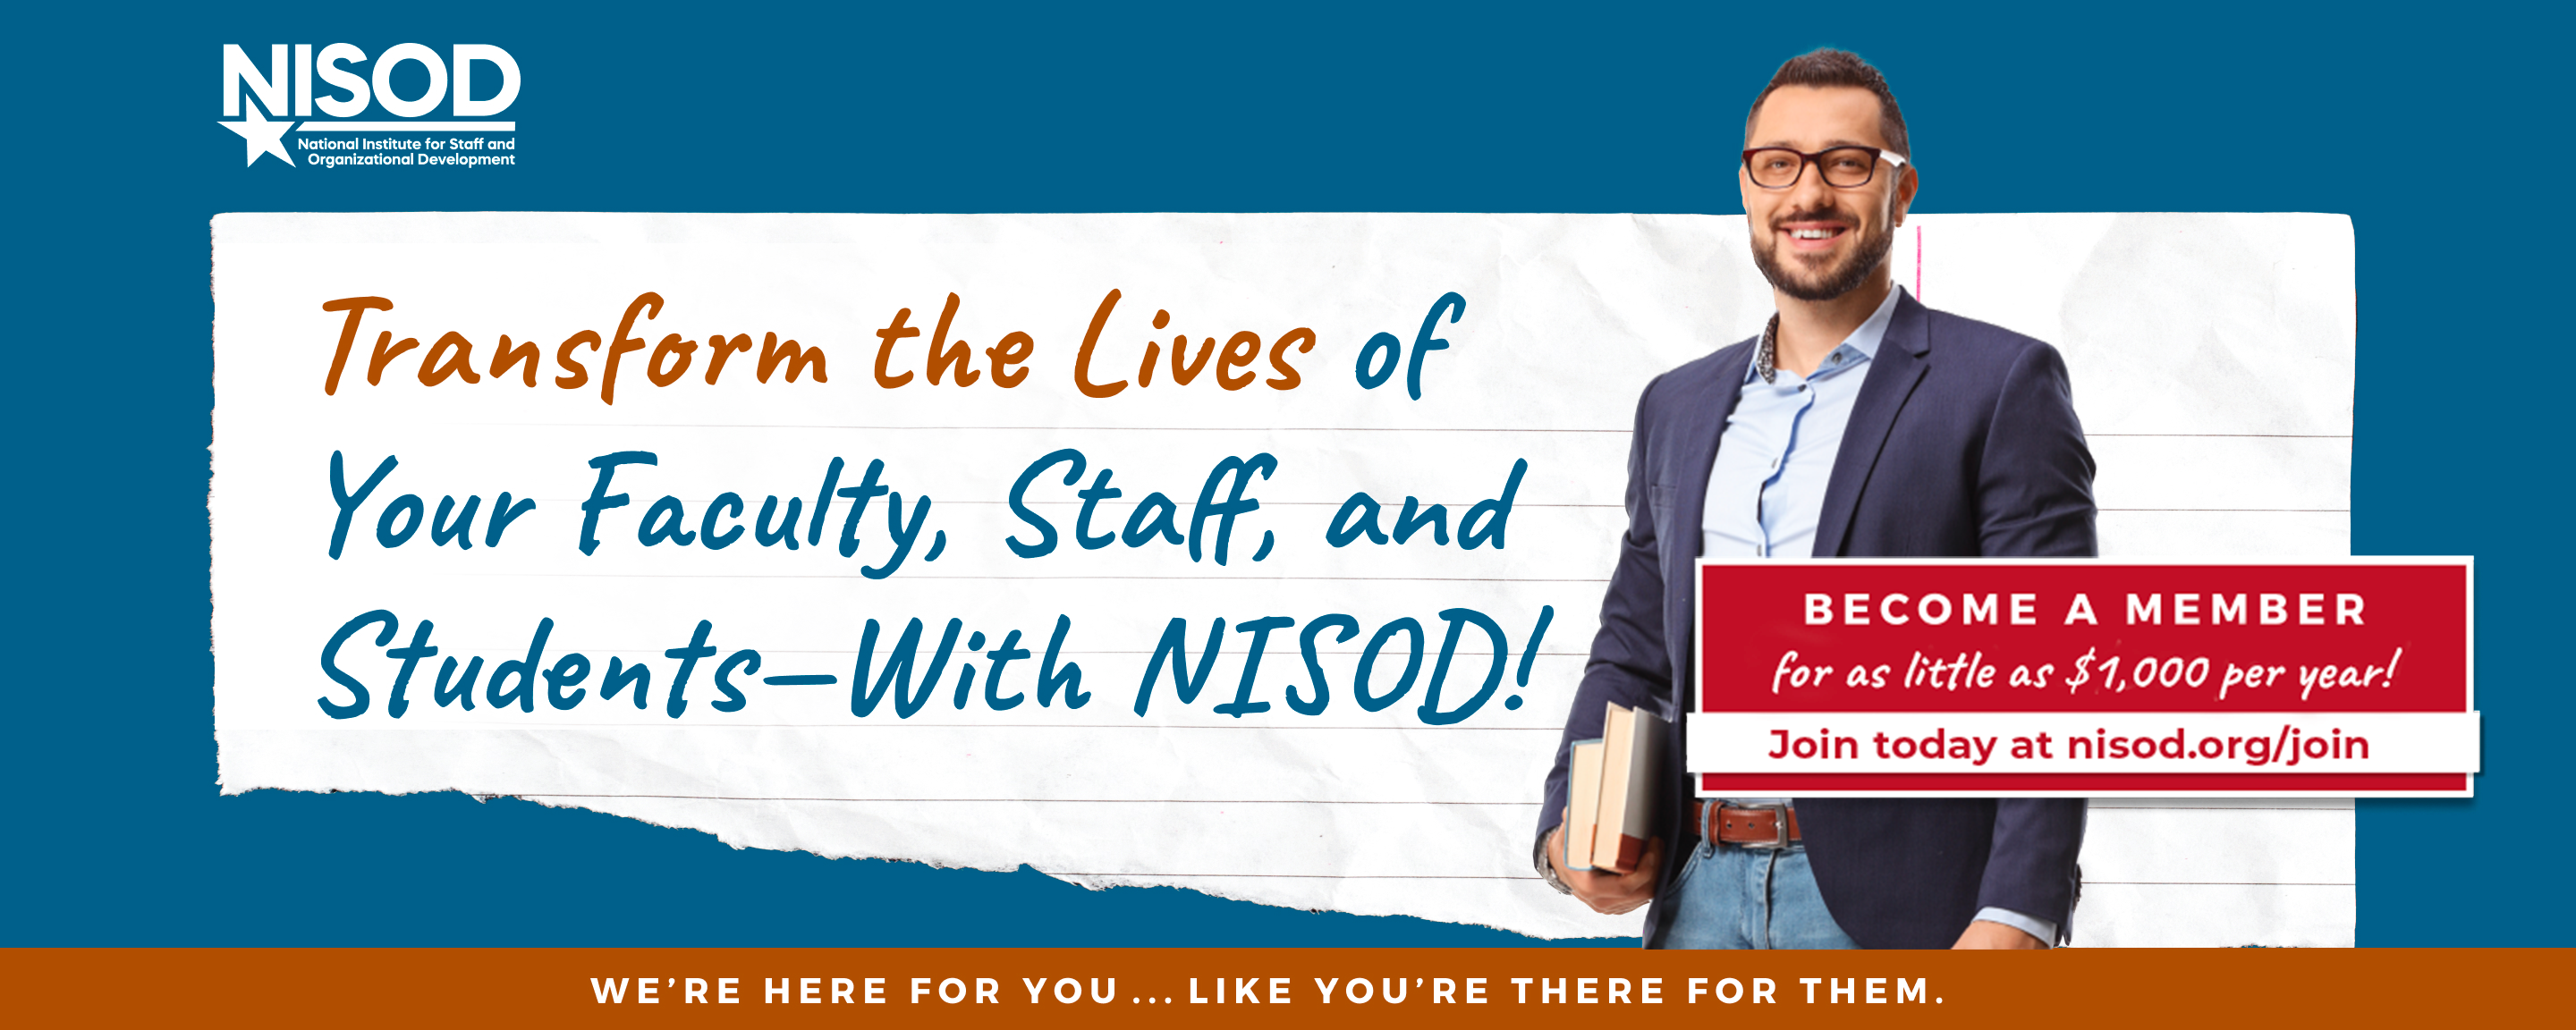 NISOD Here for you membership banner image.